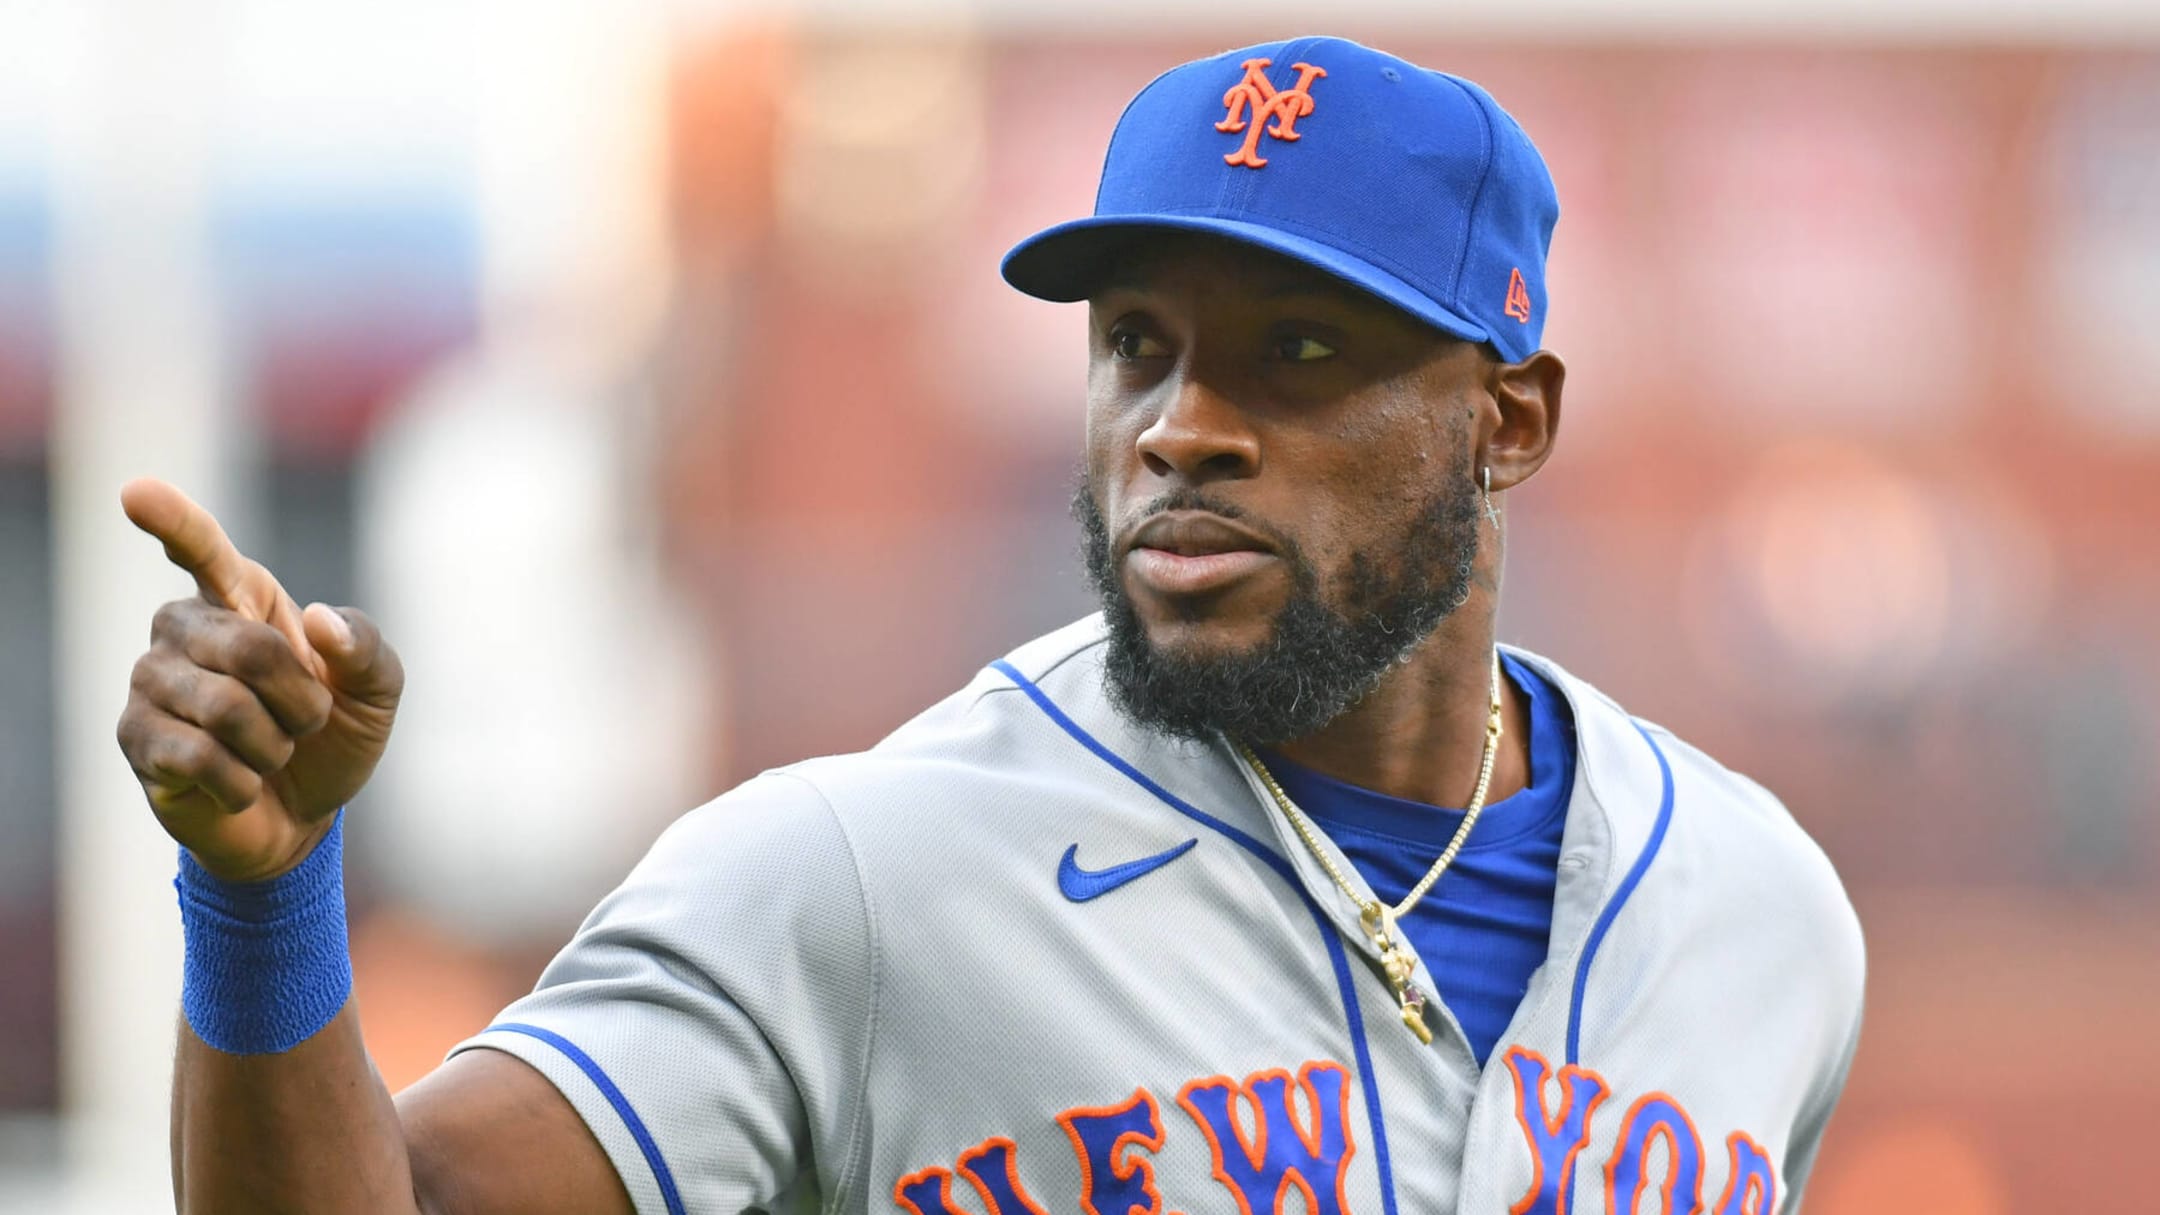 Report: Stint on IL 'a likelihood' for Mets' Starling Marte